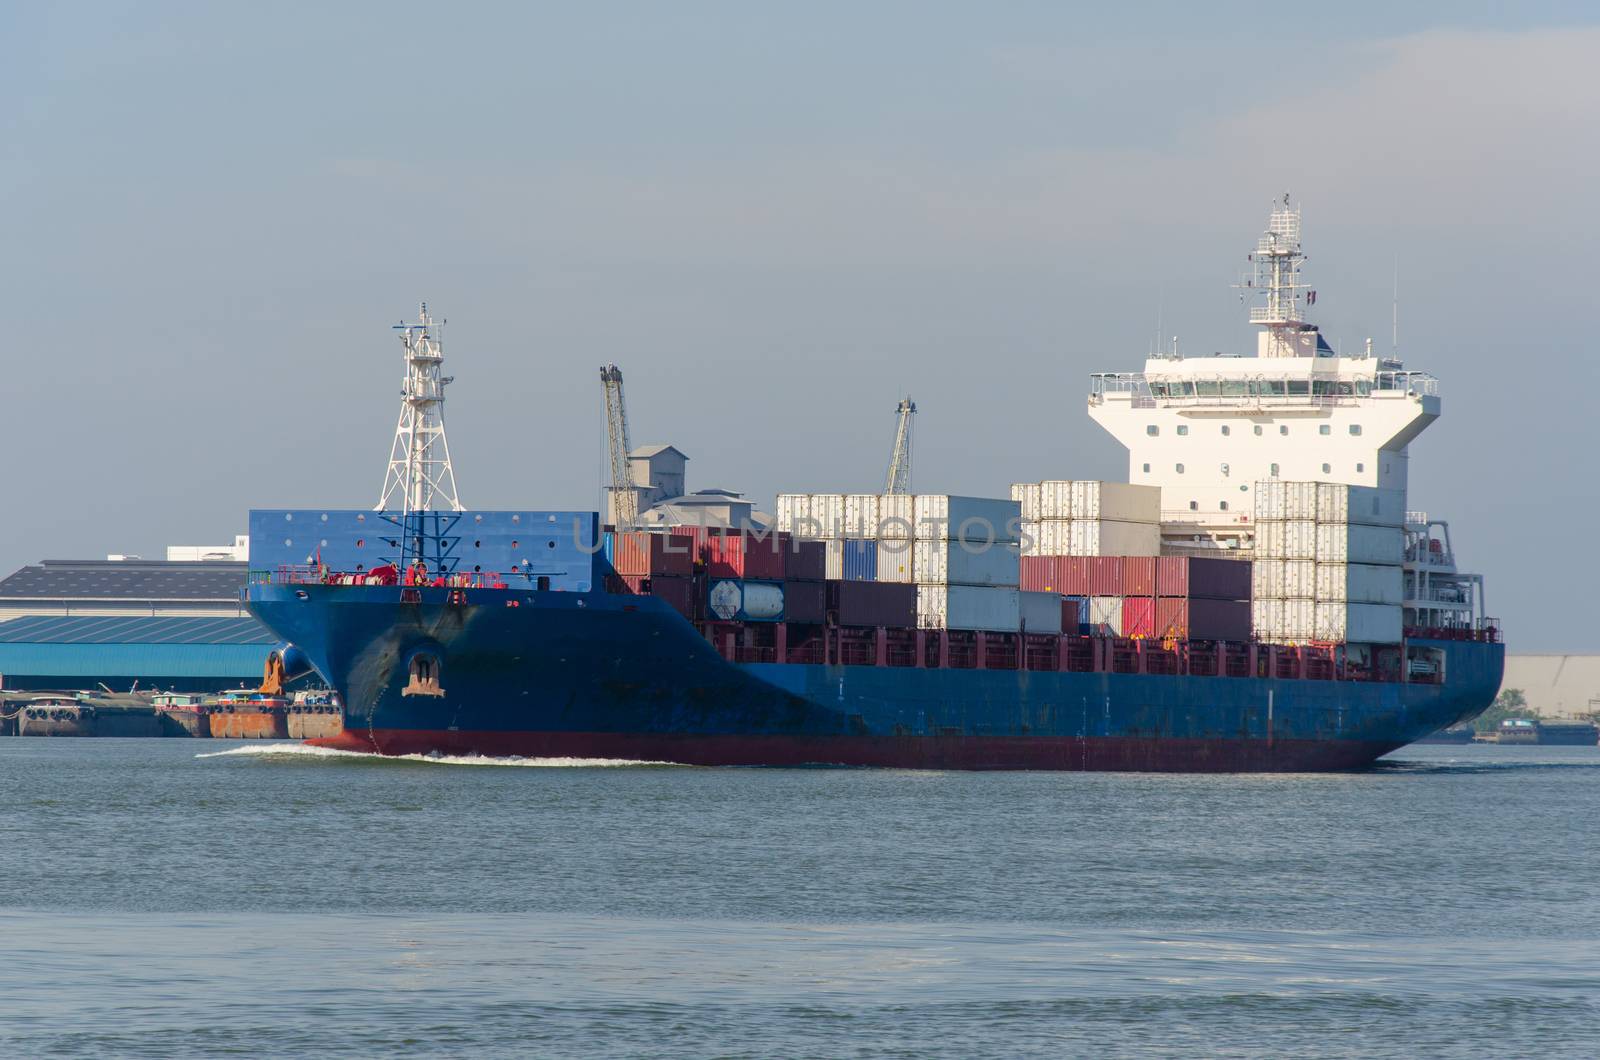 Container Cargo ship by aoo3771